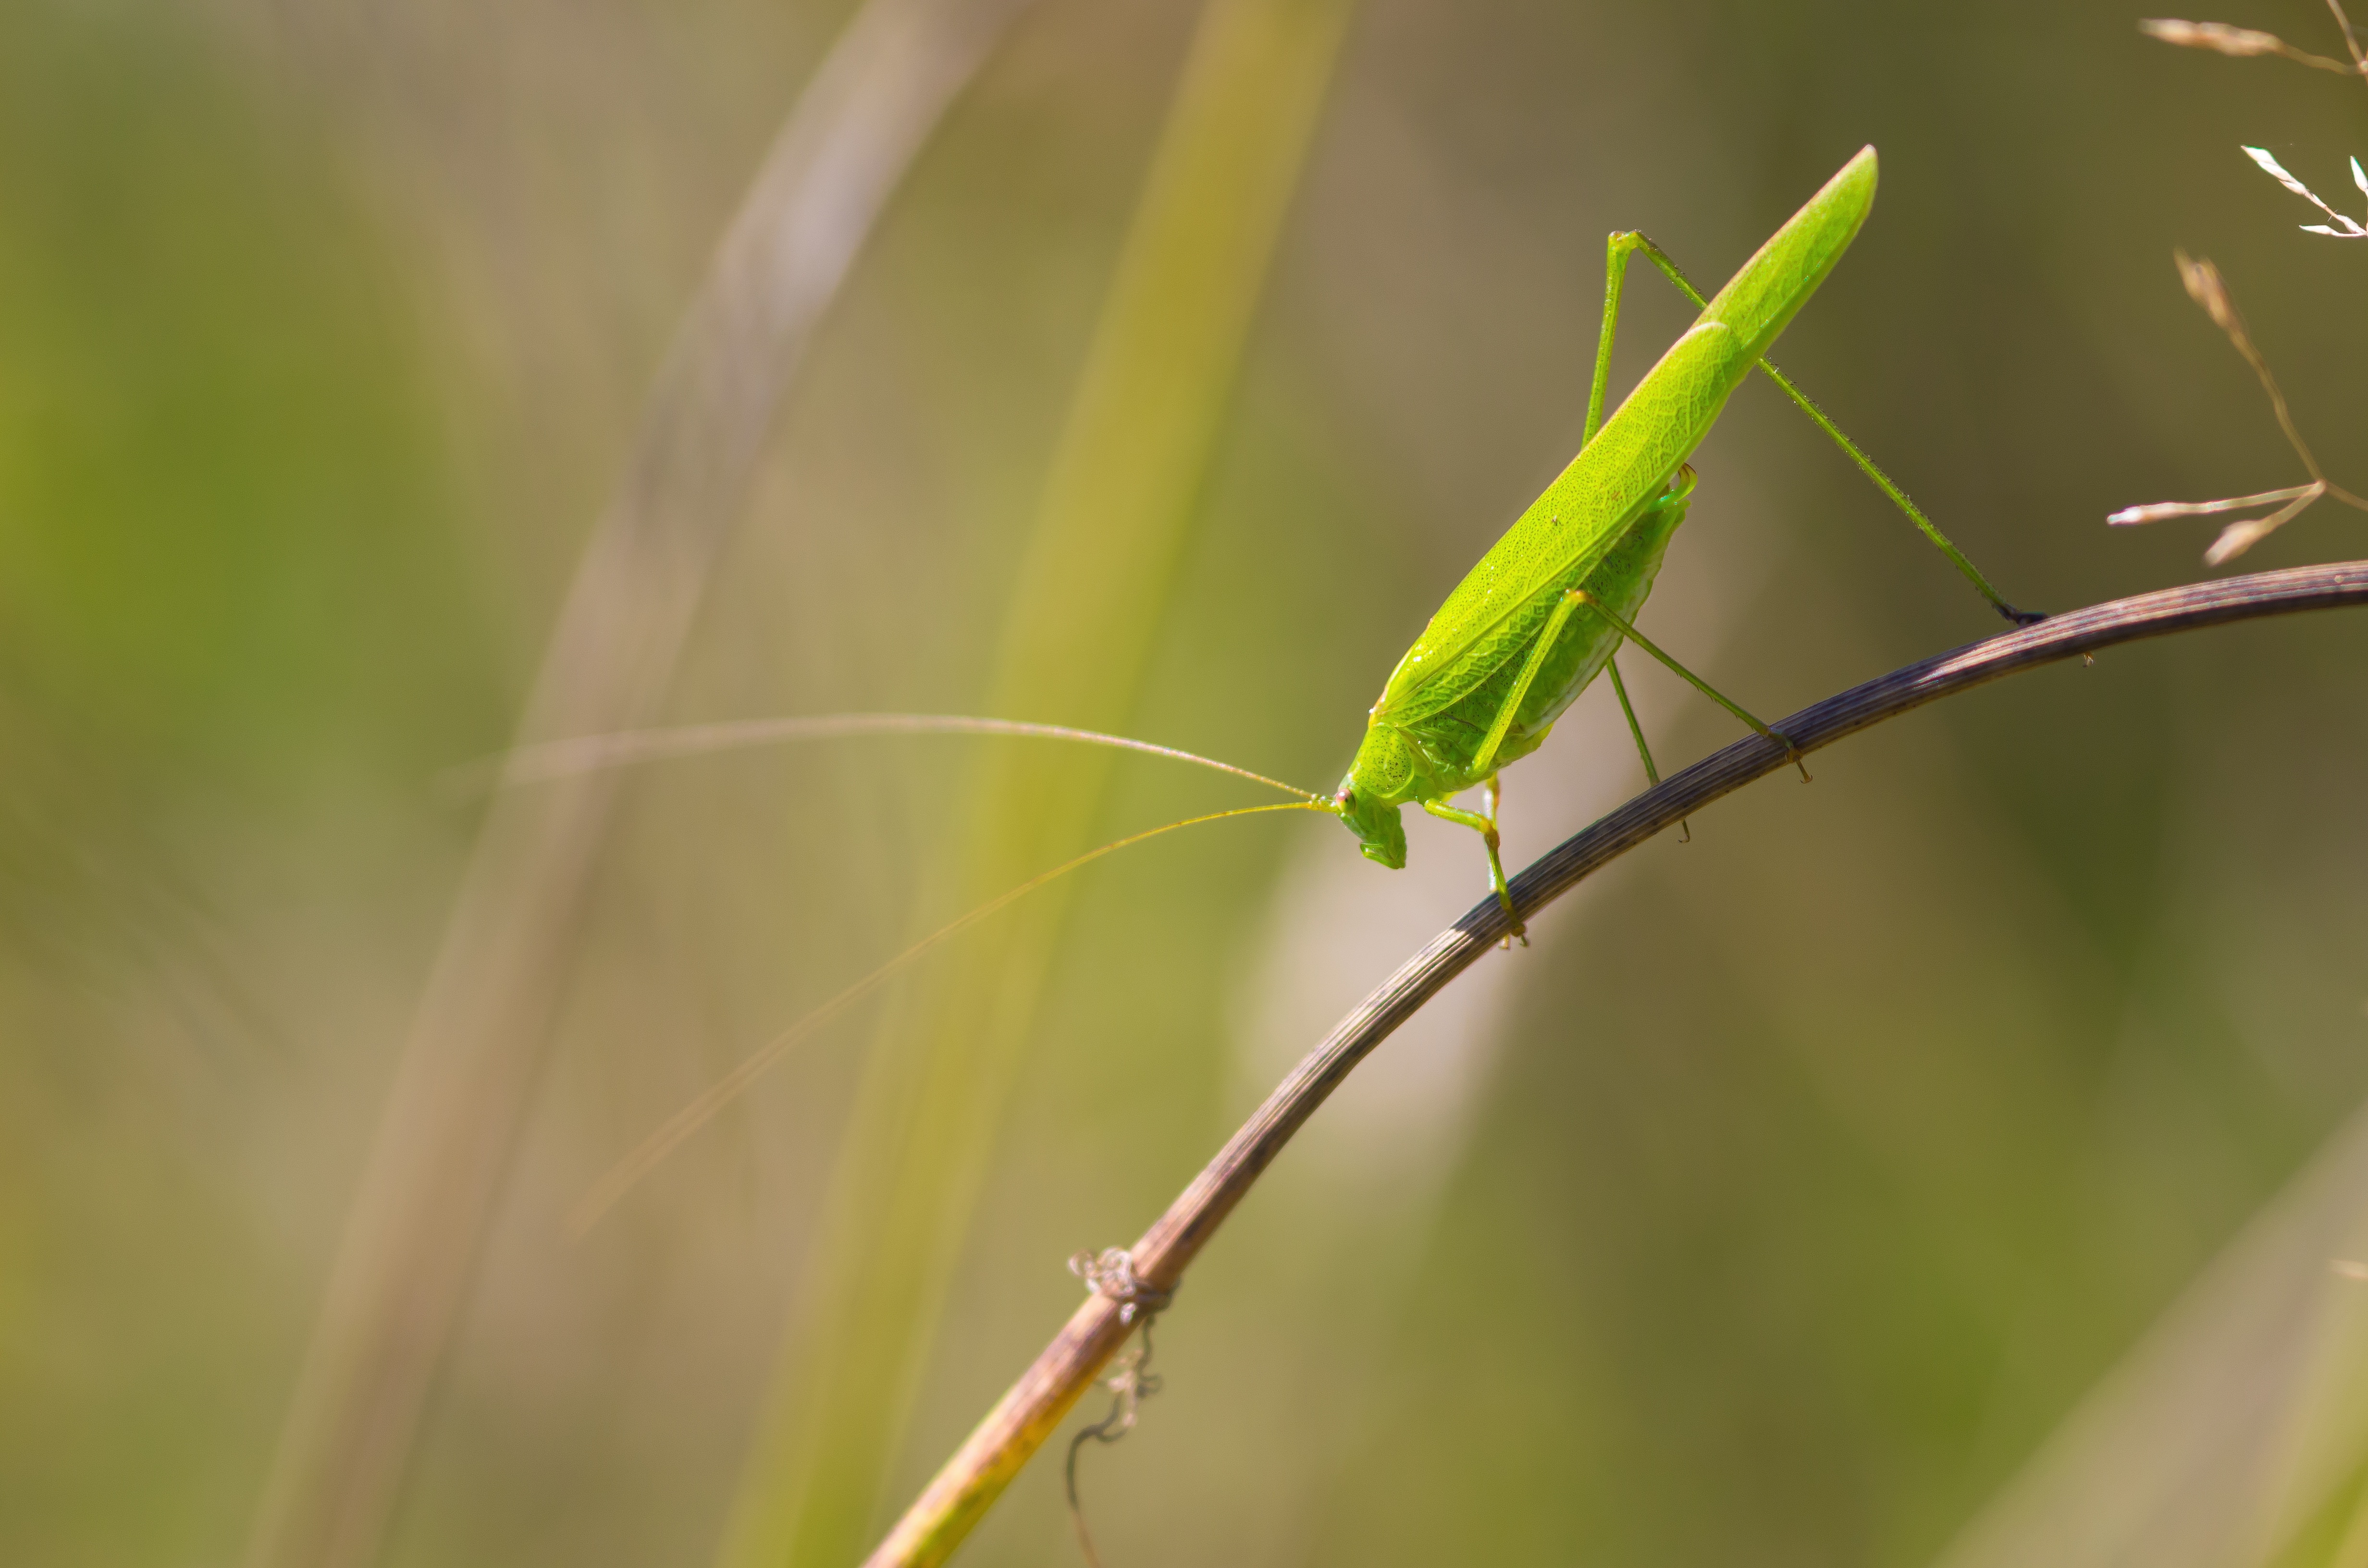 Grasshopper Insect 4928x3264